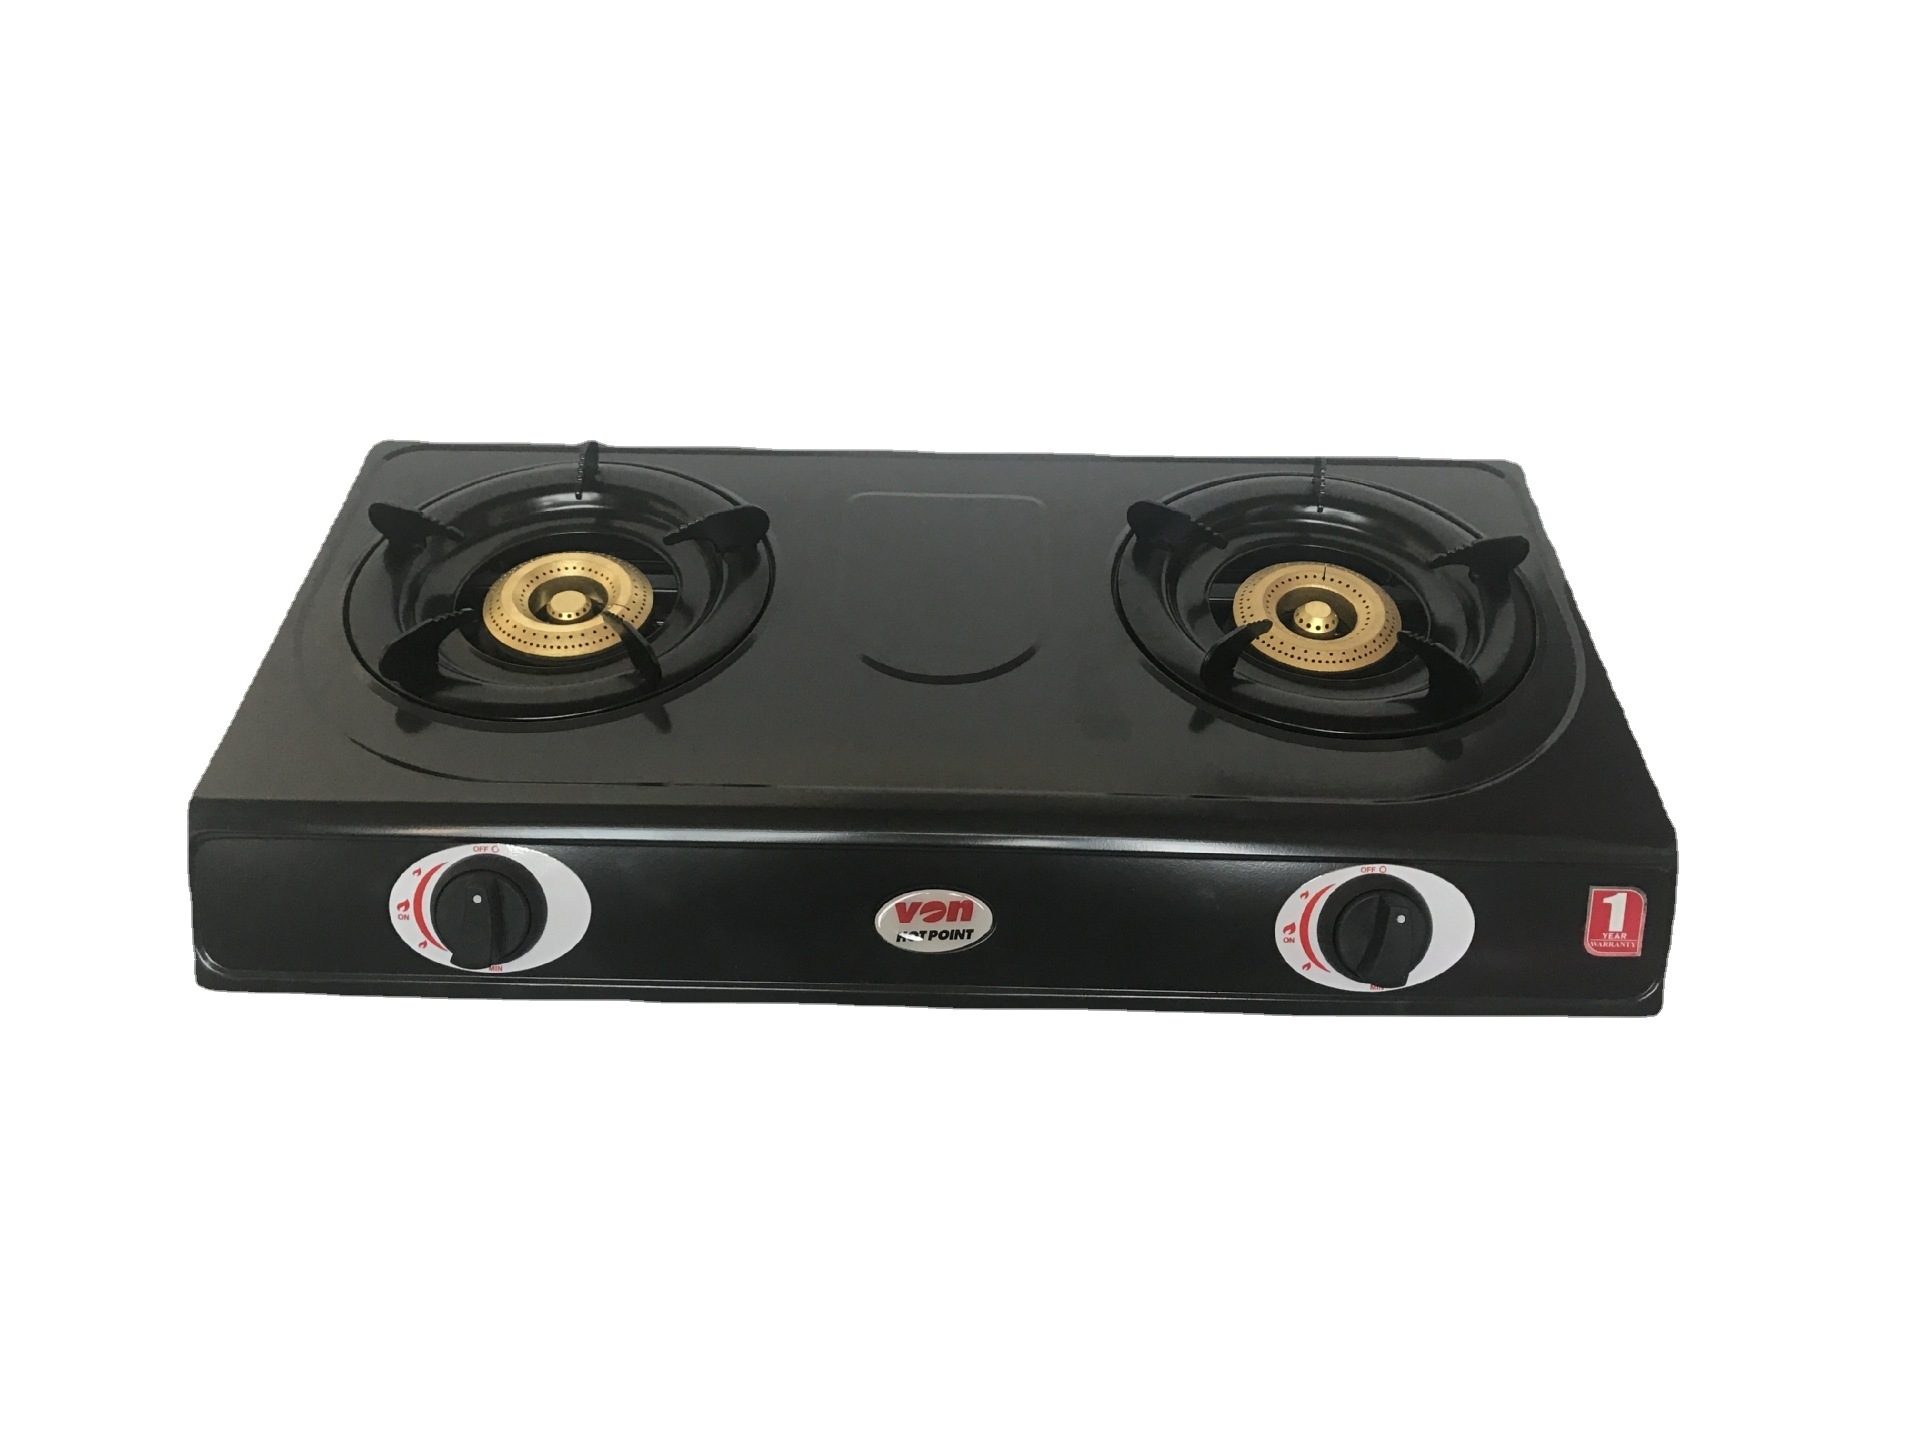 Double Burner Stove 2000W Disc Outlet Stove 110V Stove Laboratory Gas Furnace